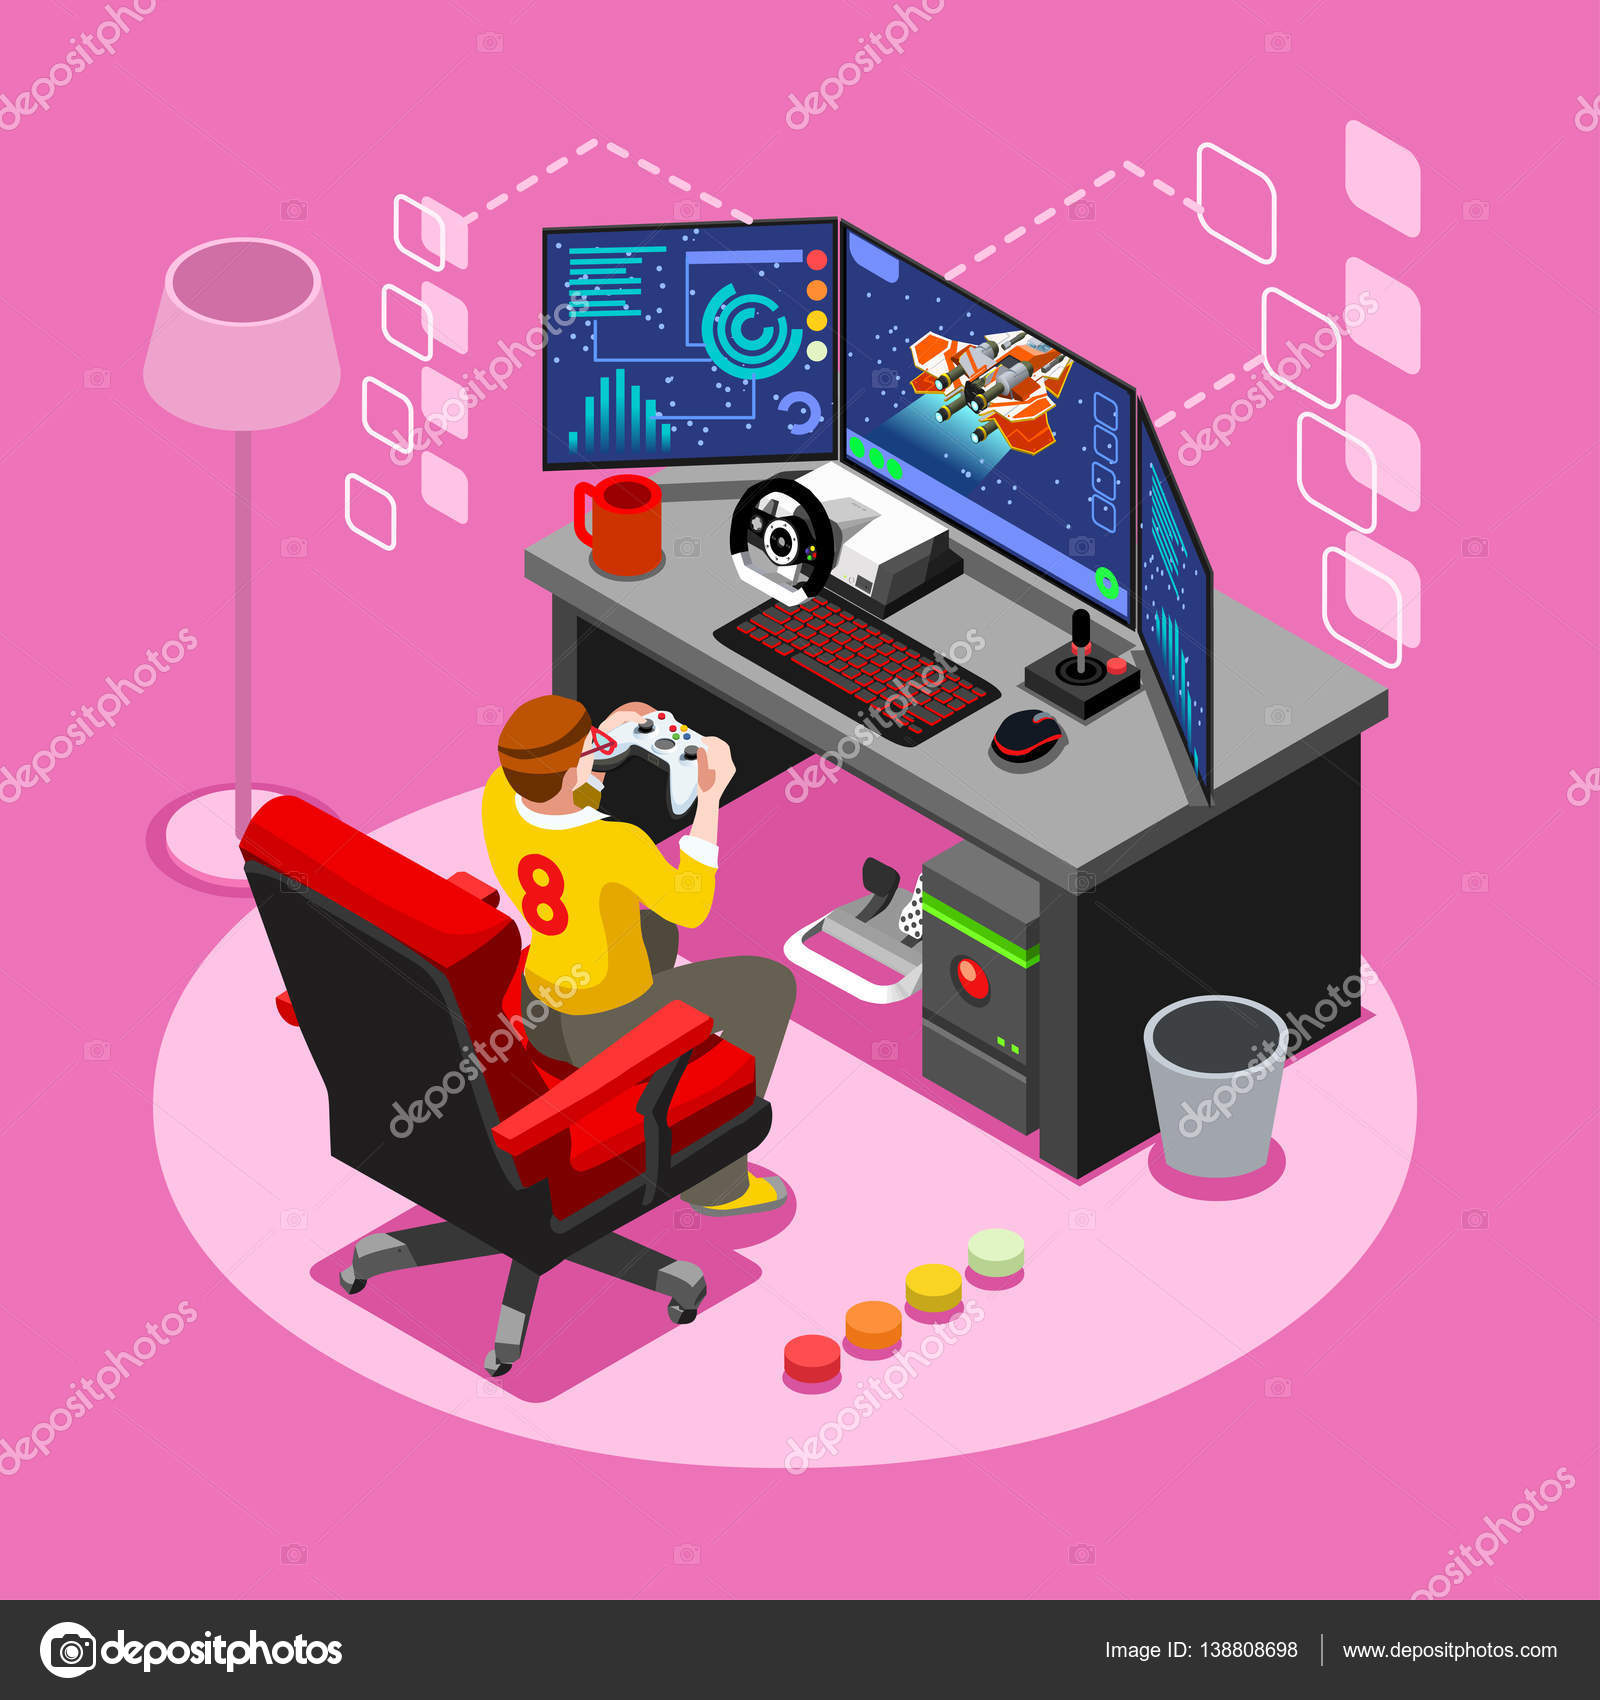 Computer game Illustrations and Clip Art. 11,292 Computer game royalty free  illustrations and drawings availab…